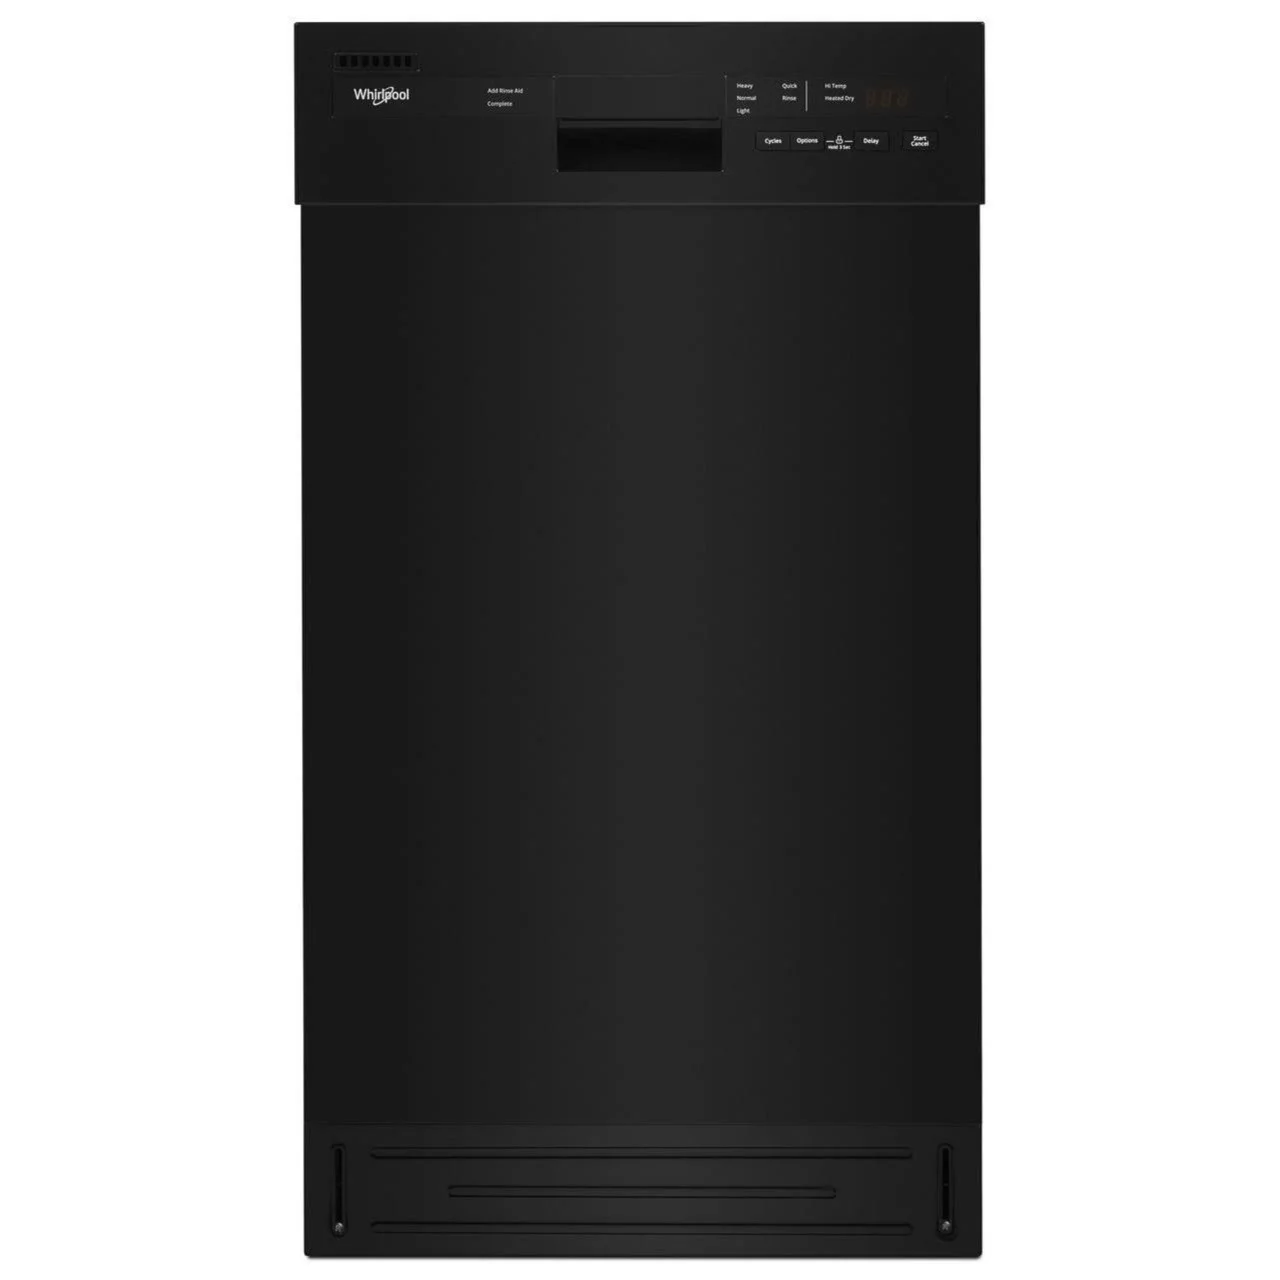 Whirlpool WDF518SAHB Small-Space Compact Dishwasher with Stainless